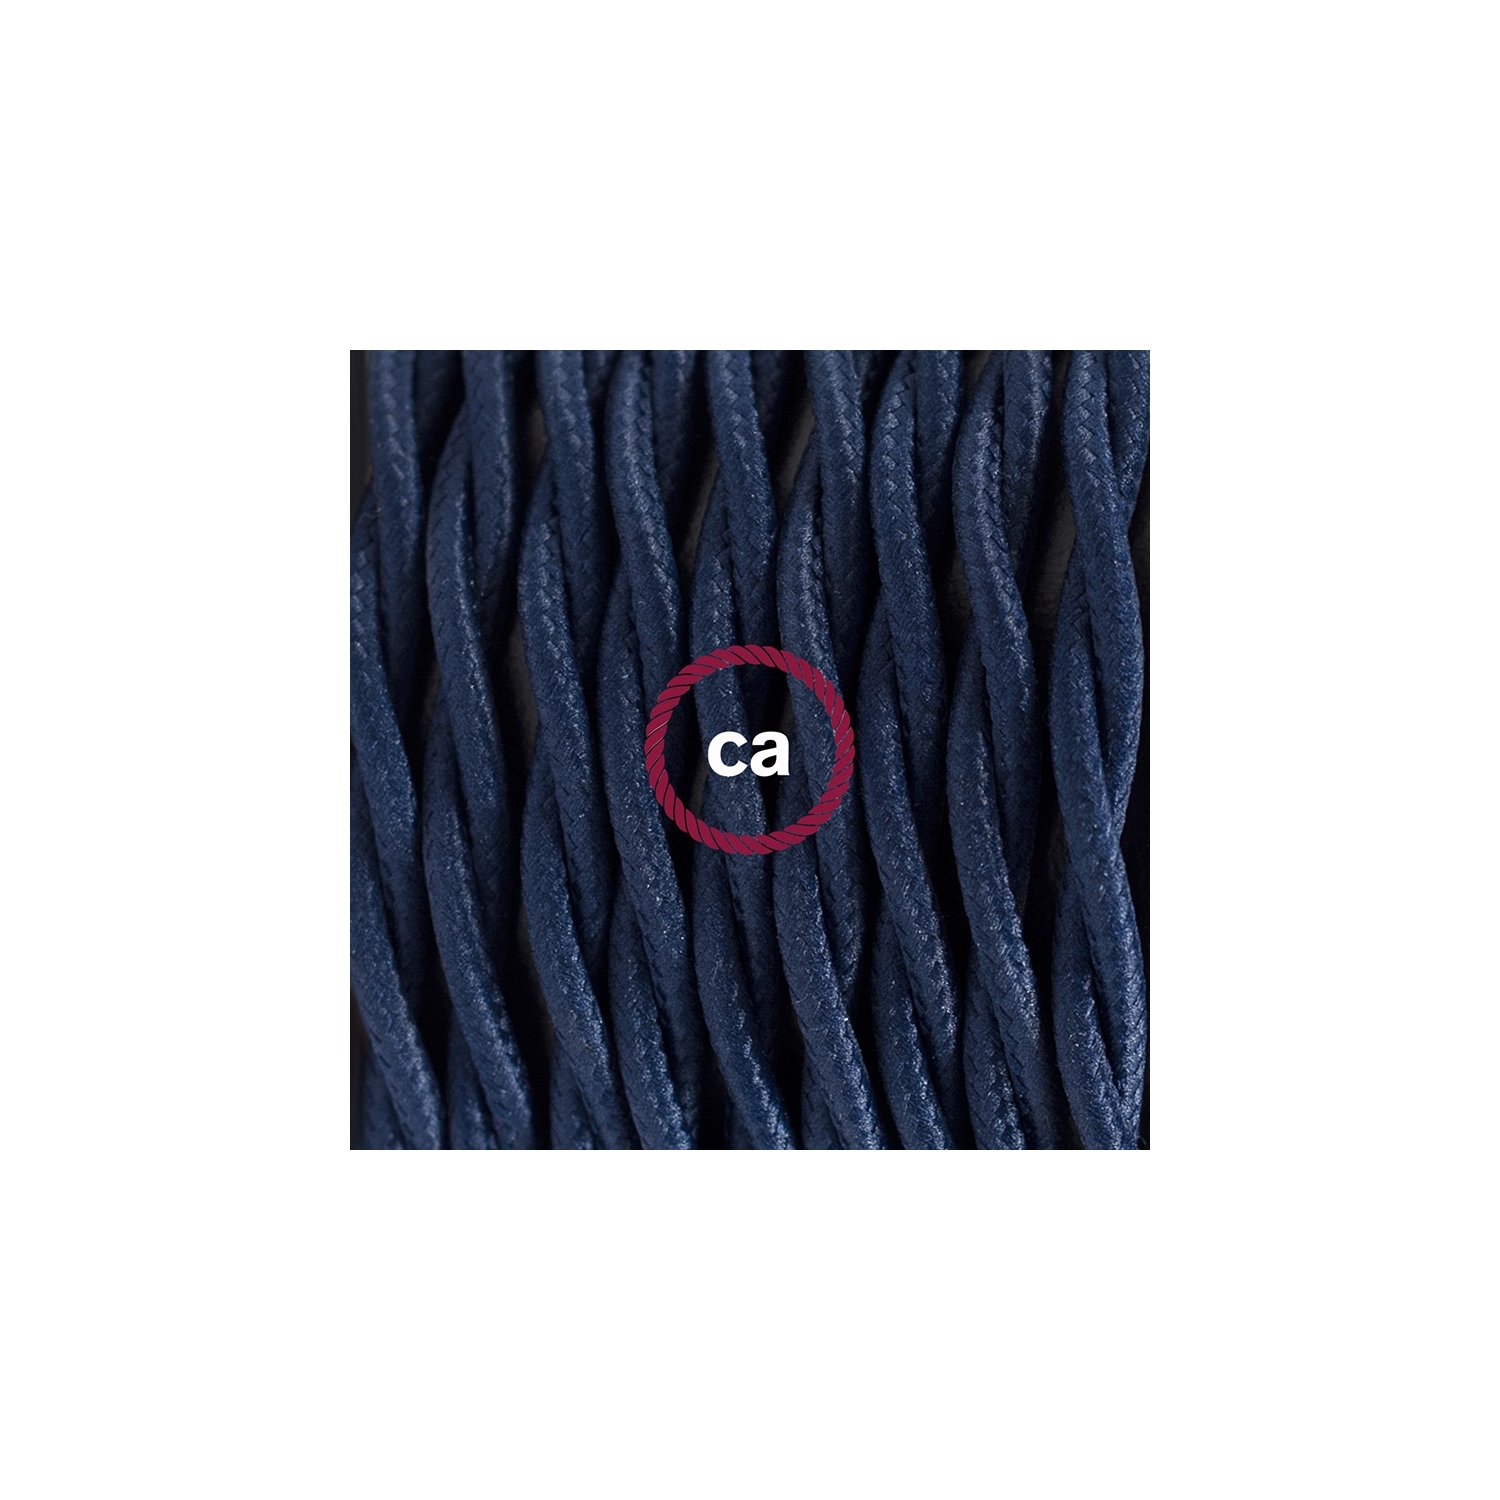 Create your TM20 Dark Blue Rayon Snake and bring the light wherever you want.